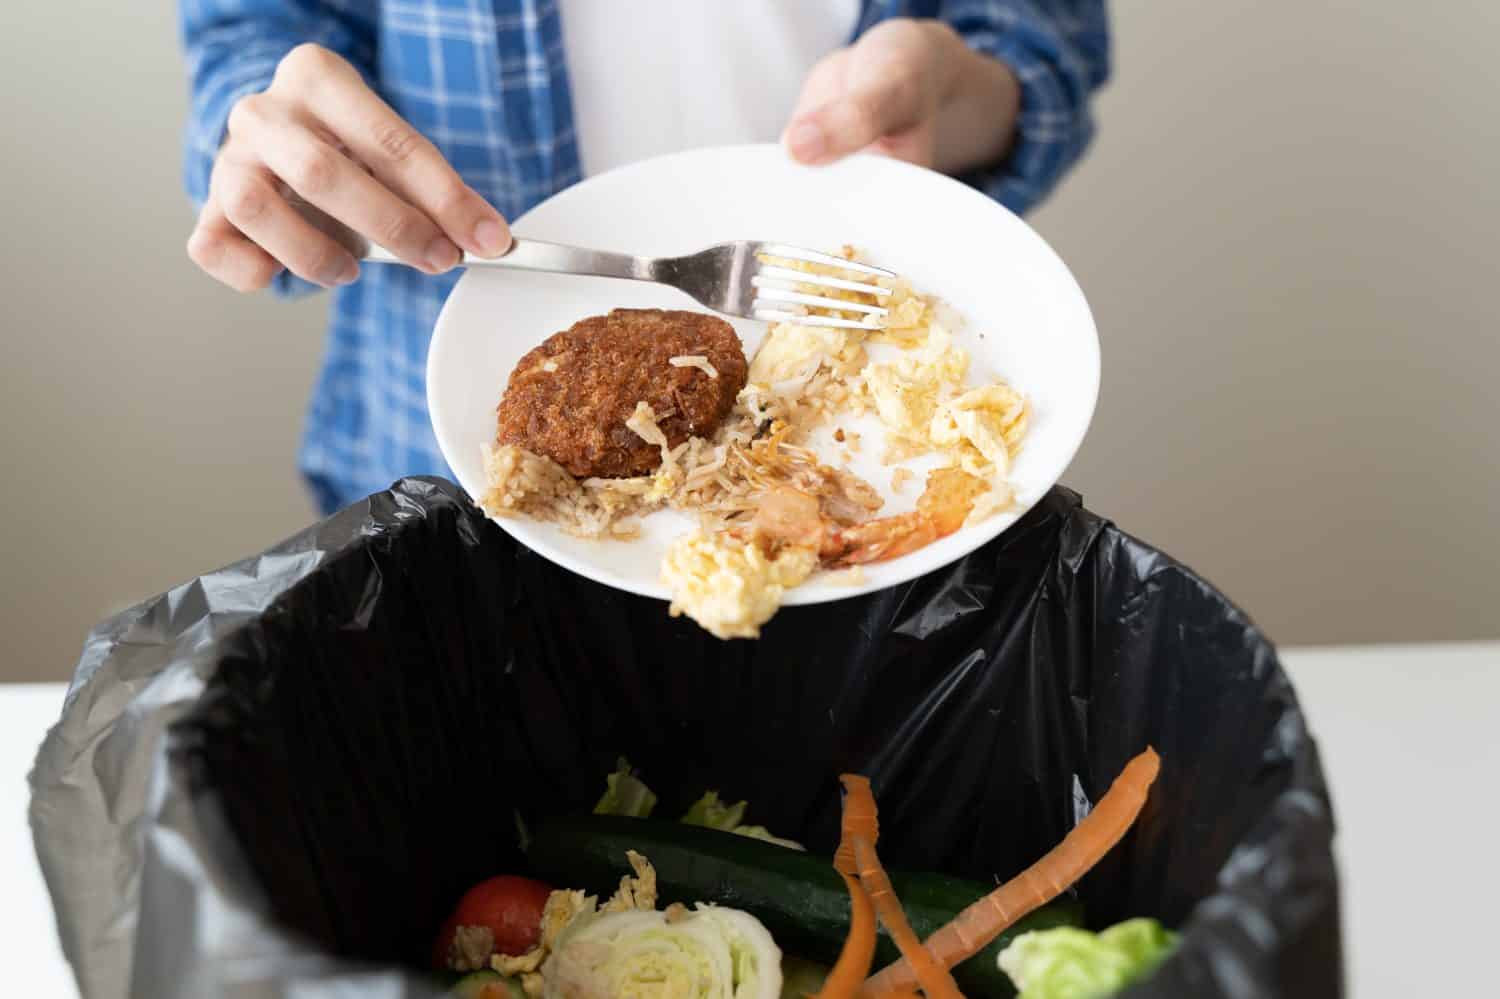 people put bio trash from food waste in domestic homes to compost bins to make fertilizer to reduce global environmental pollution.